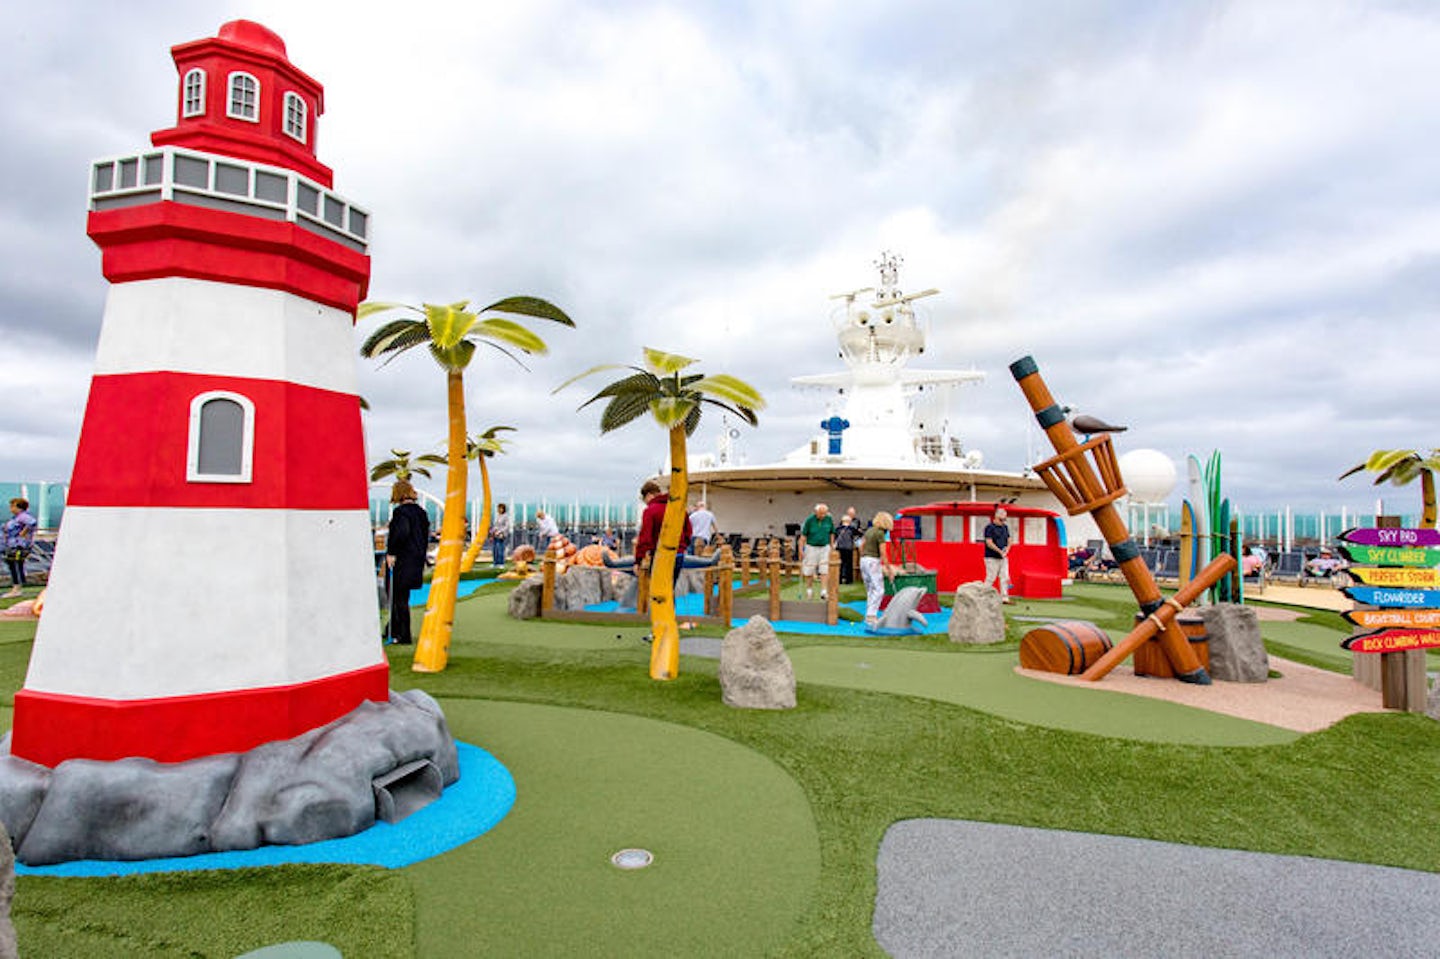 Independence Dunes Mini-Golf on Independence of the Seas